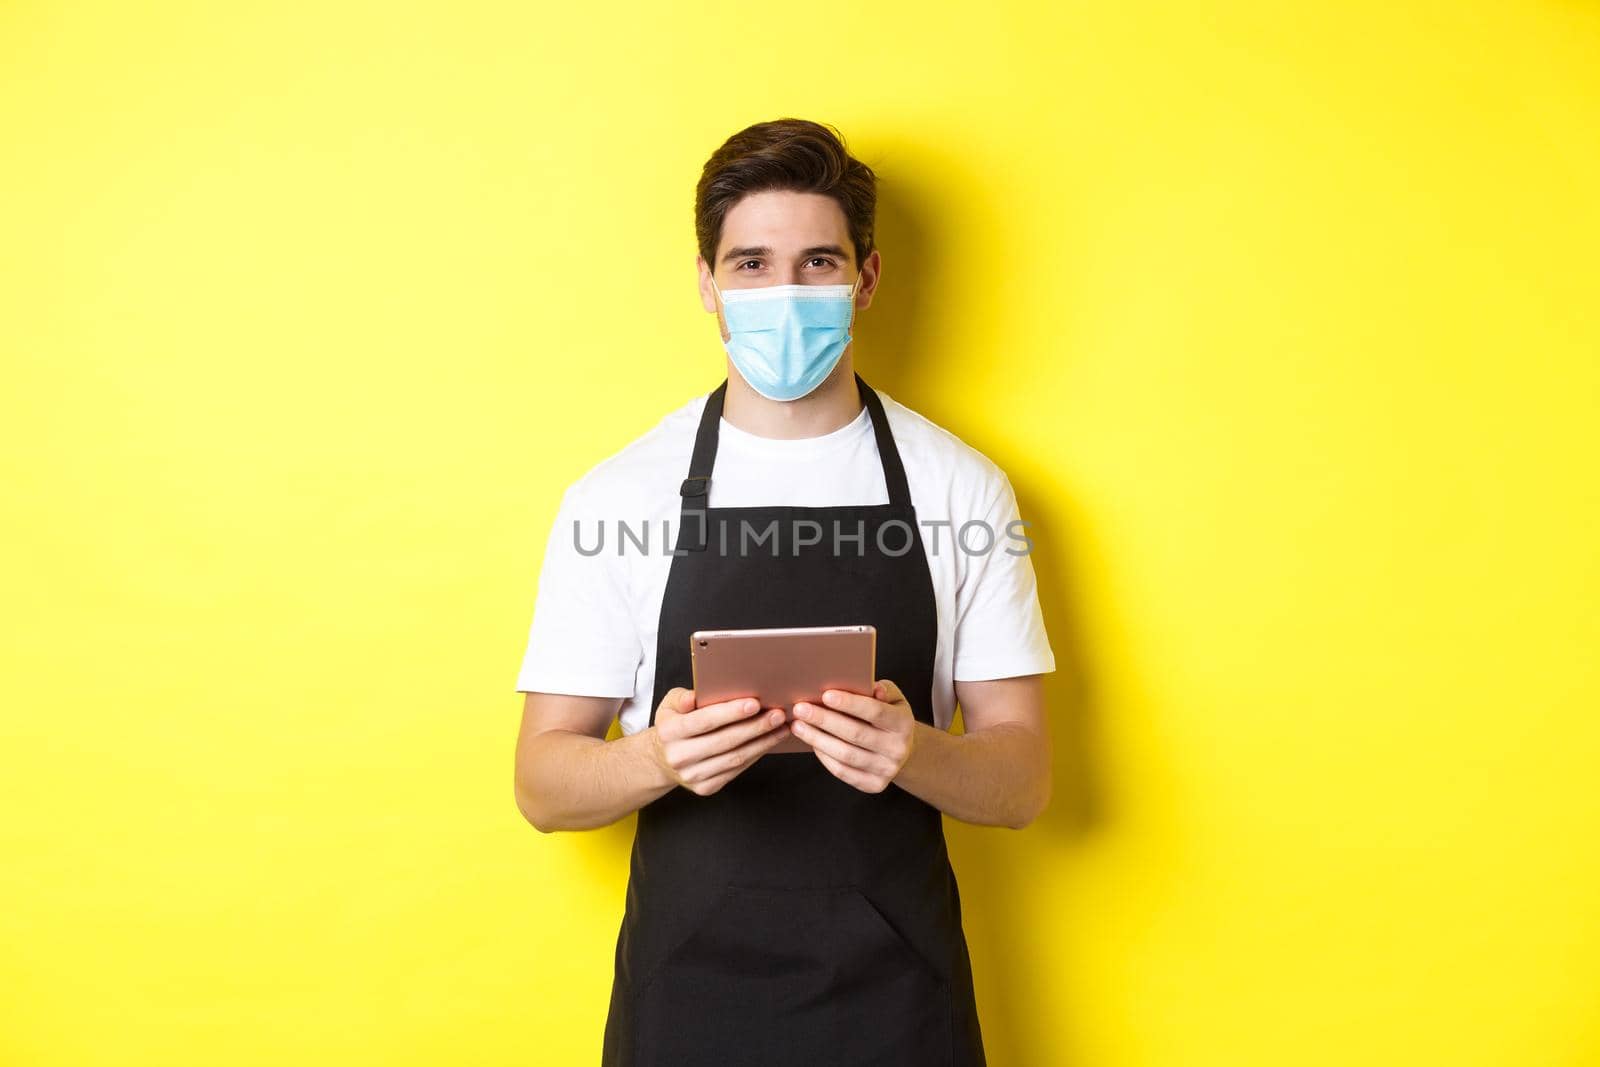 Concept of covid-19, small business and pandemic. Waiter in black apron and medical mask taking order, holding digital tablet, standing over yellow background.